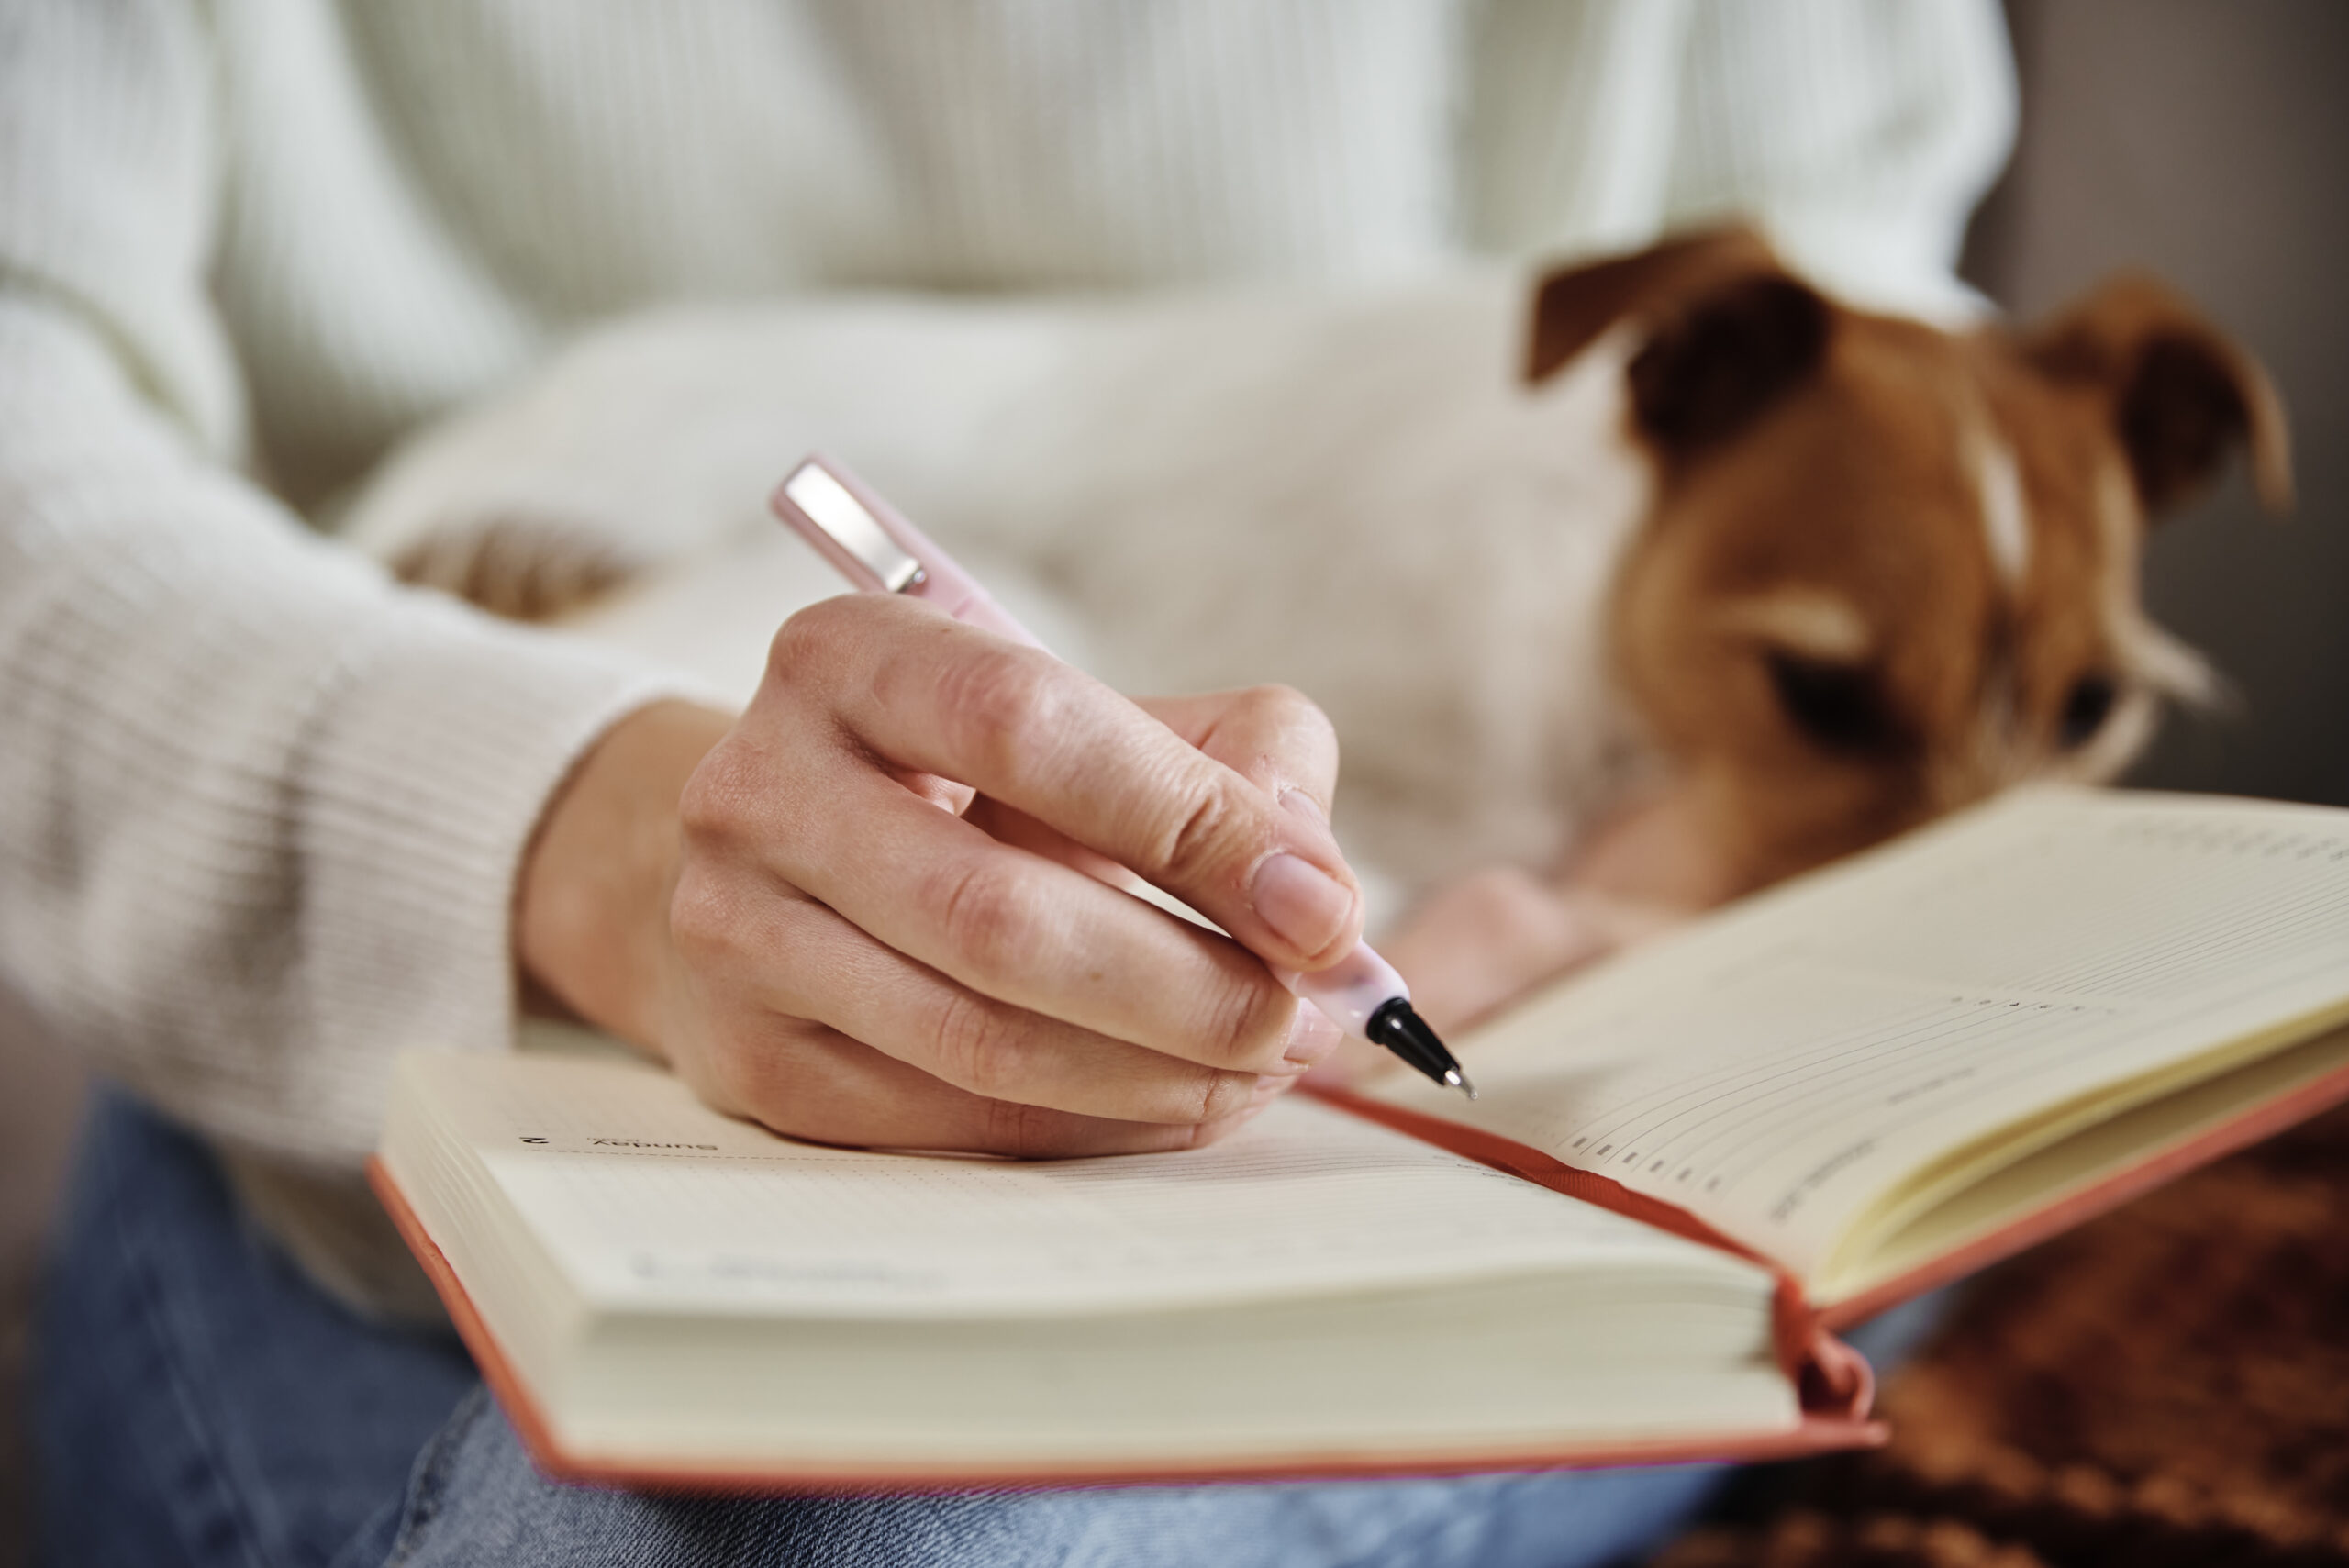 Photo of a person with a white shirt and light skin writing in a journal with a dog on their lap.